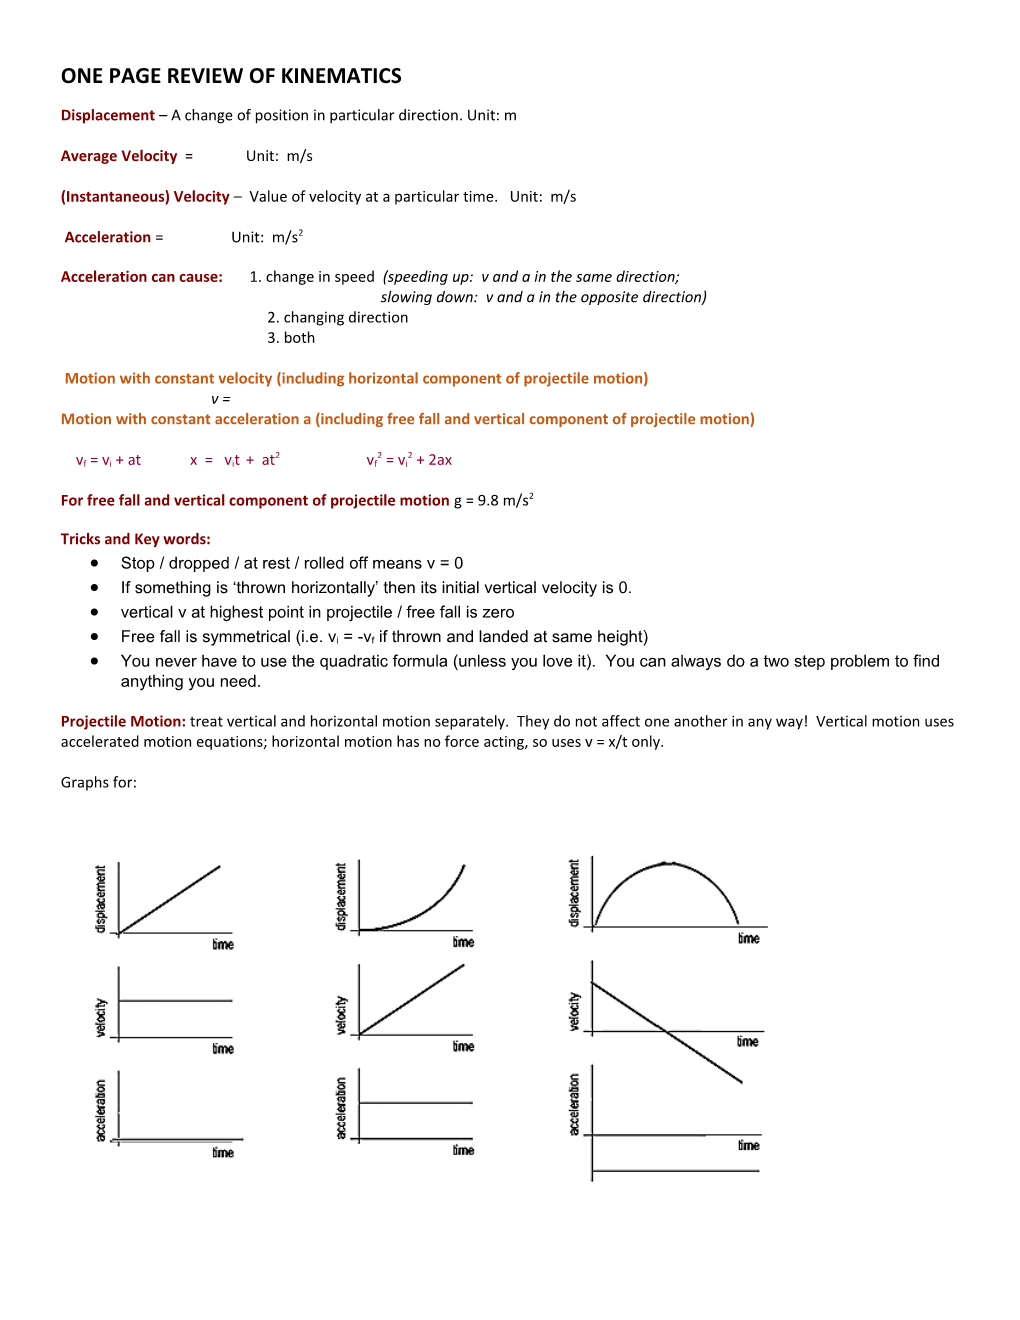 One Page Review of Kinematics